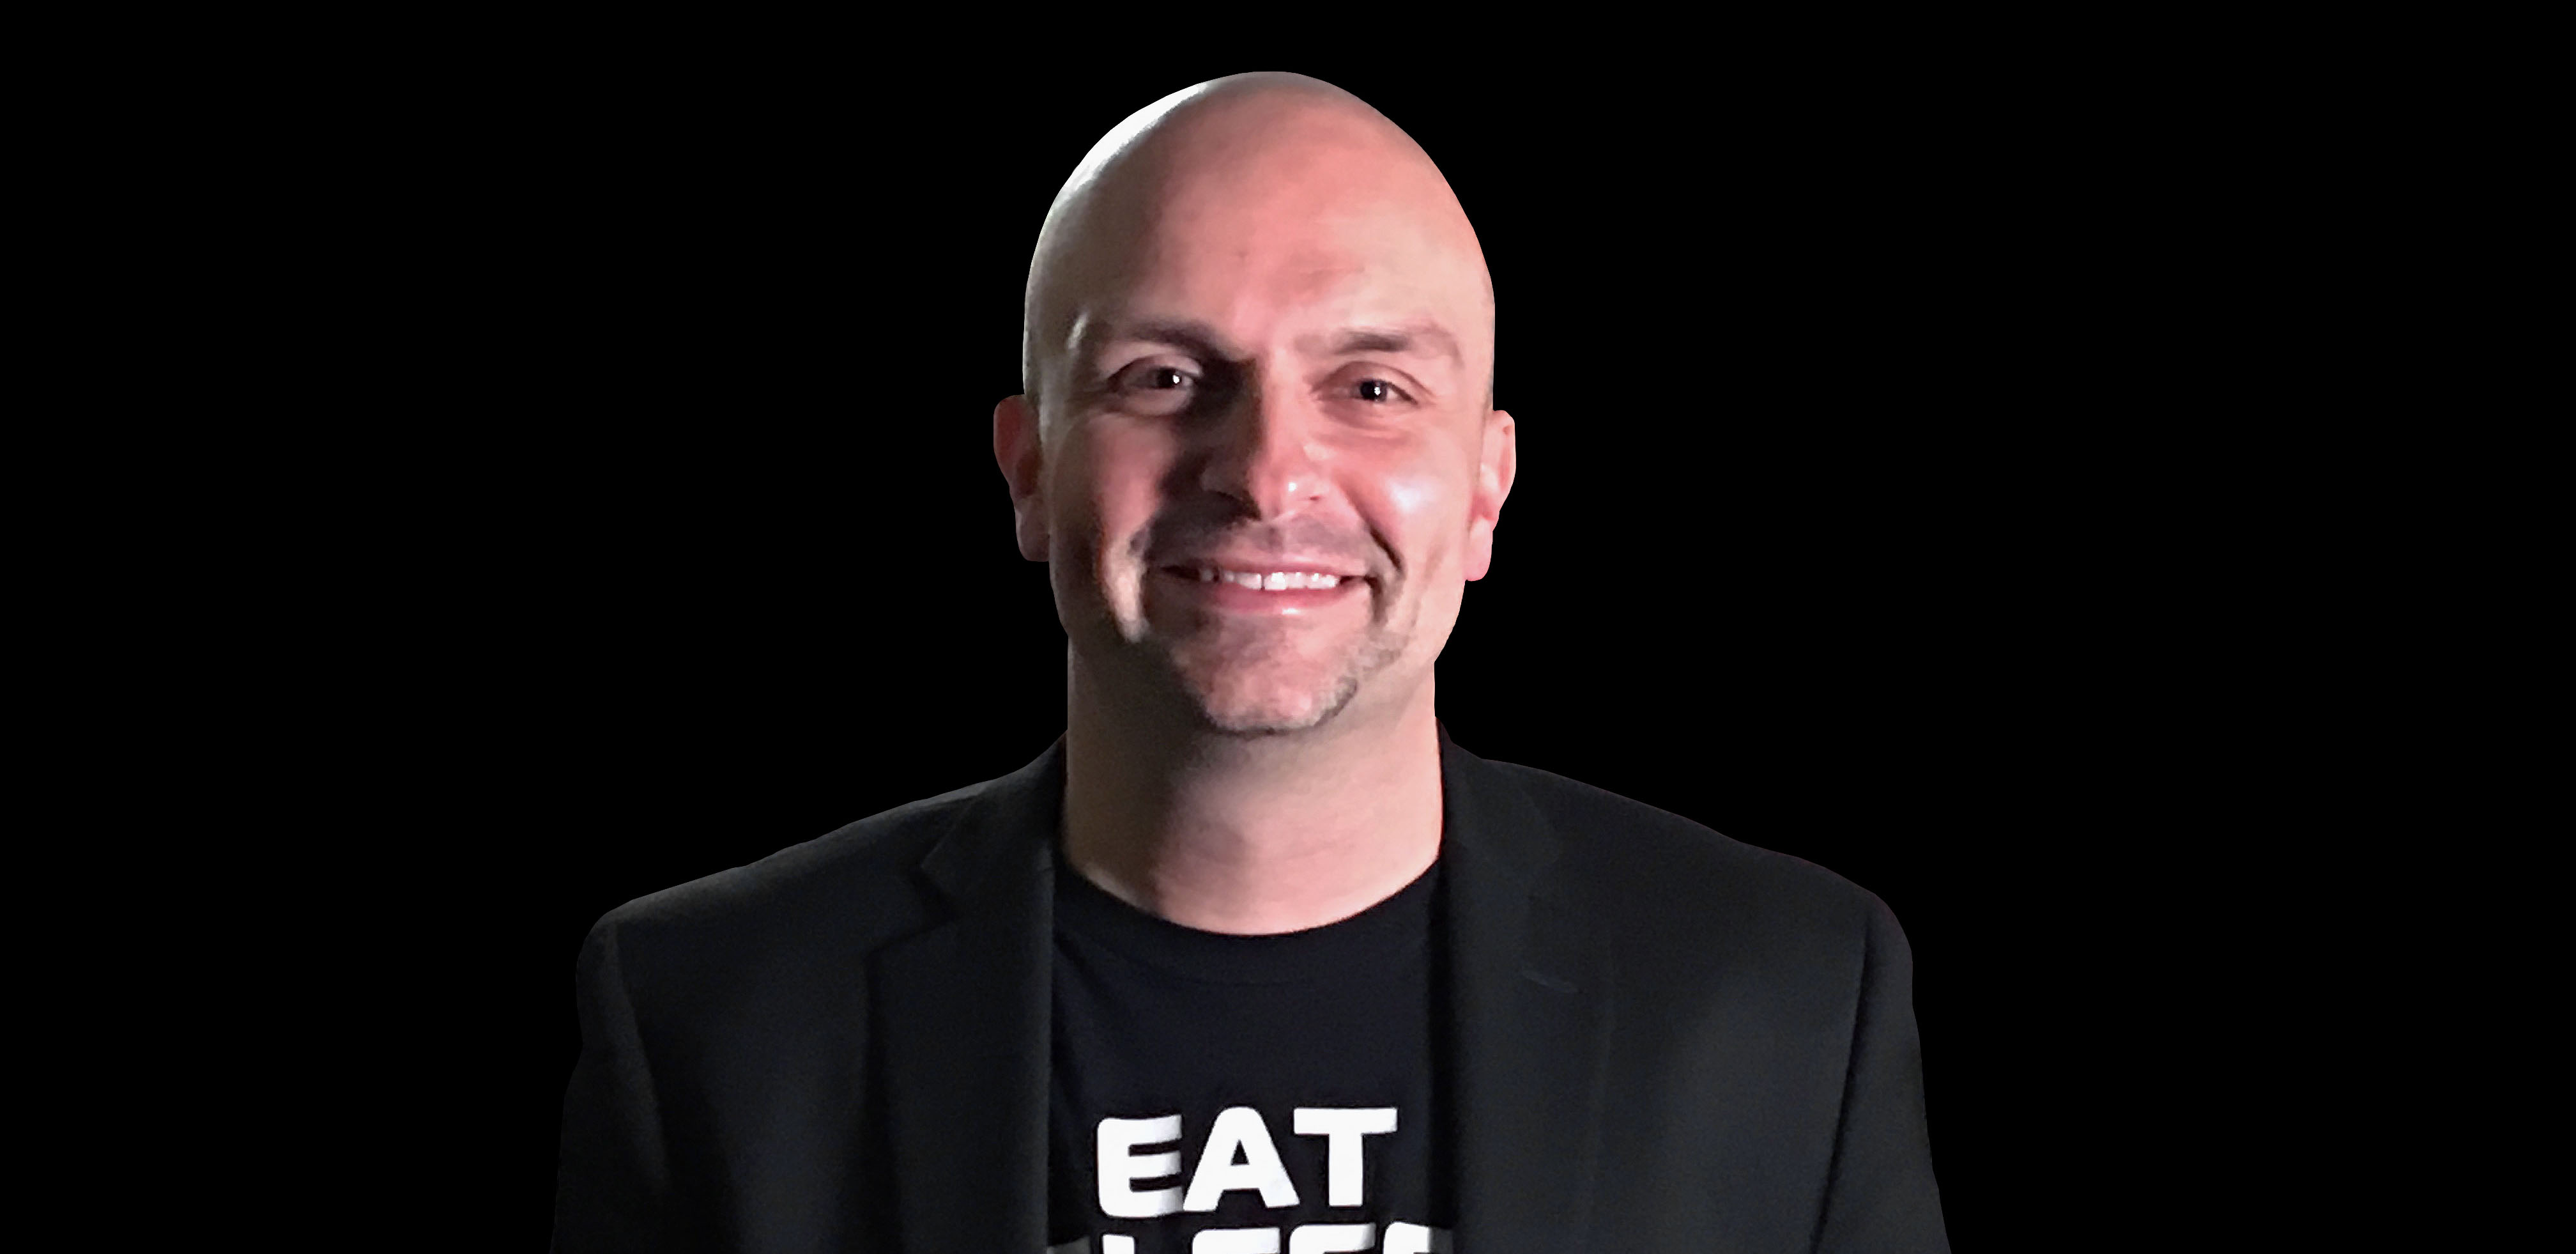 Photo of ORIGIN PC co-founder Kevin Wasielewski wearing a black t-shirt and black jacket against a black background